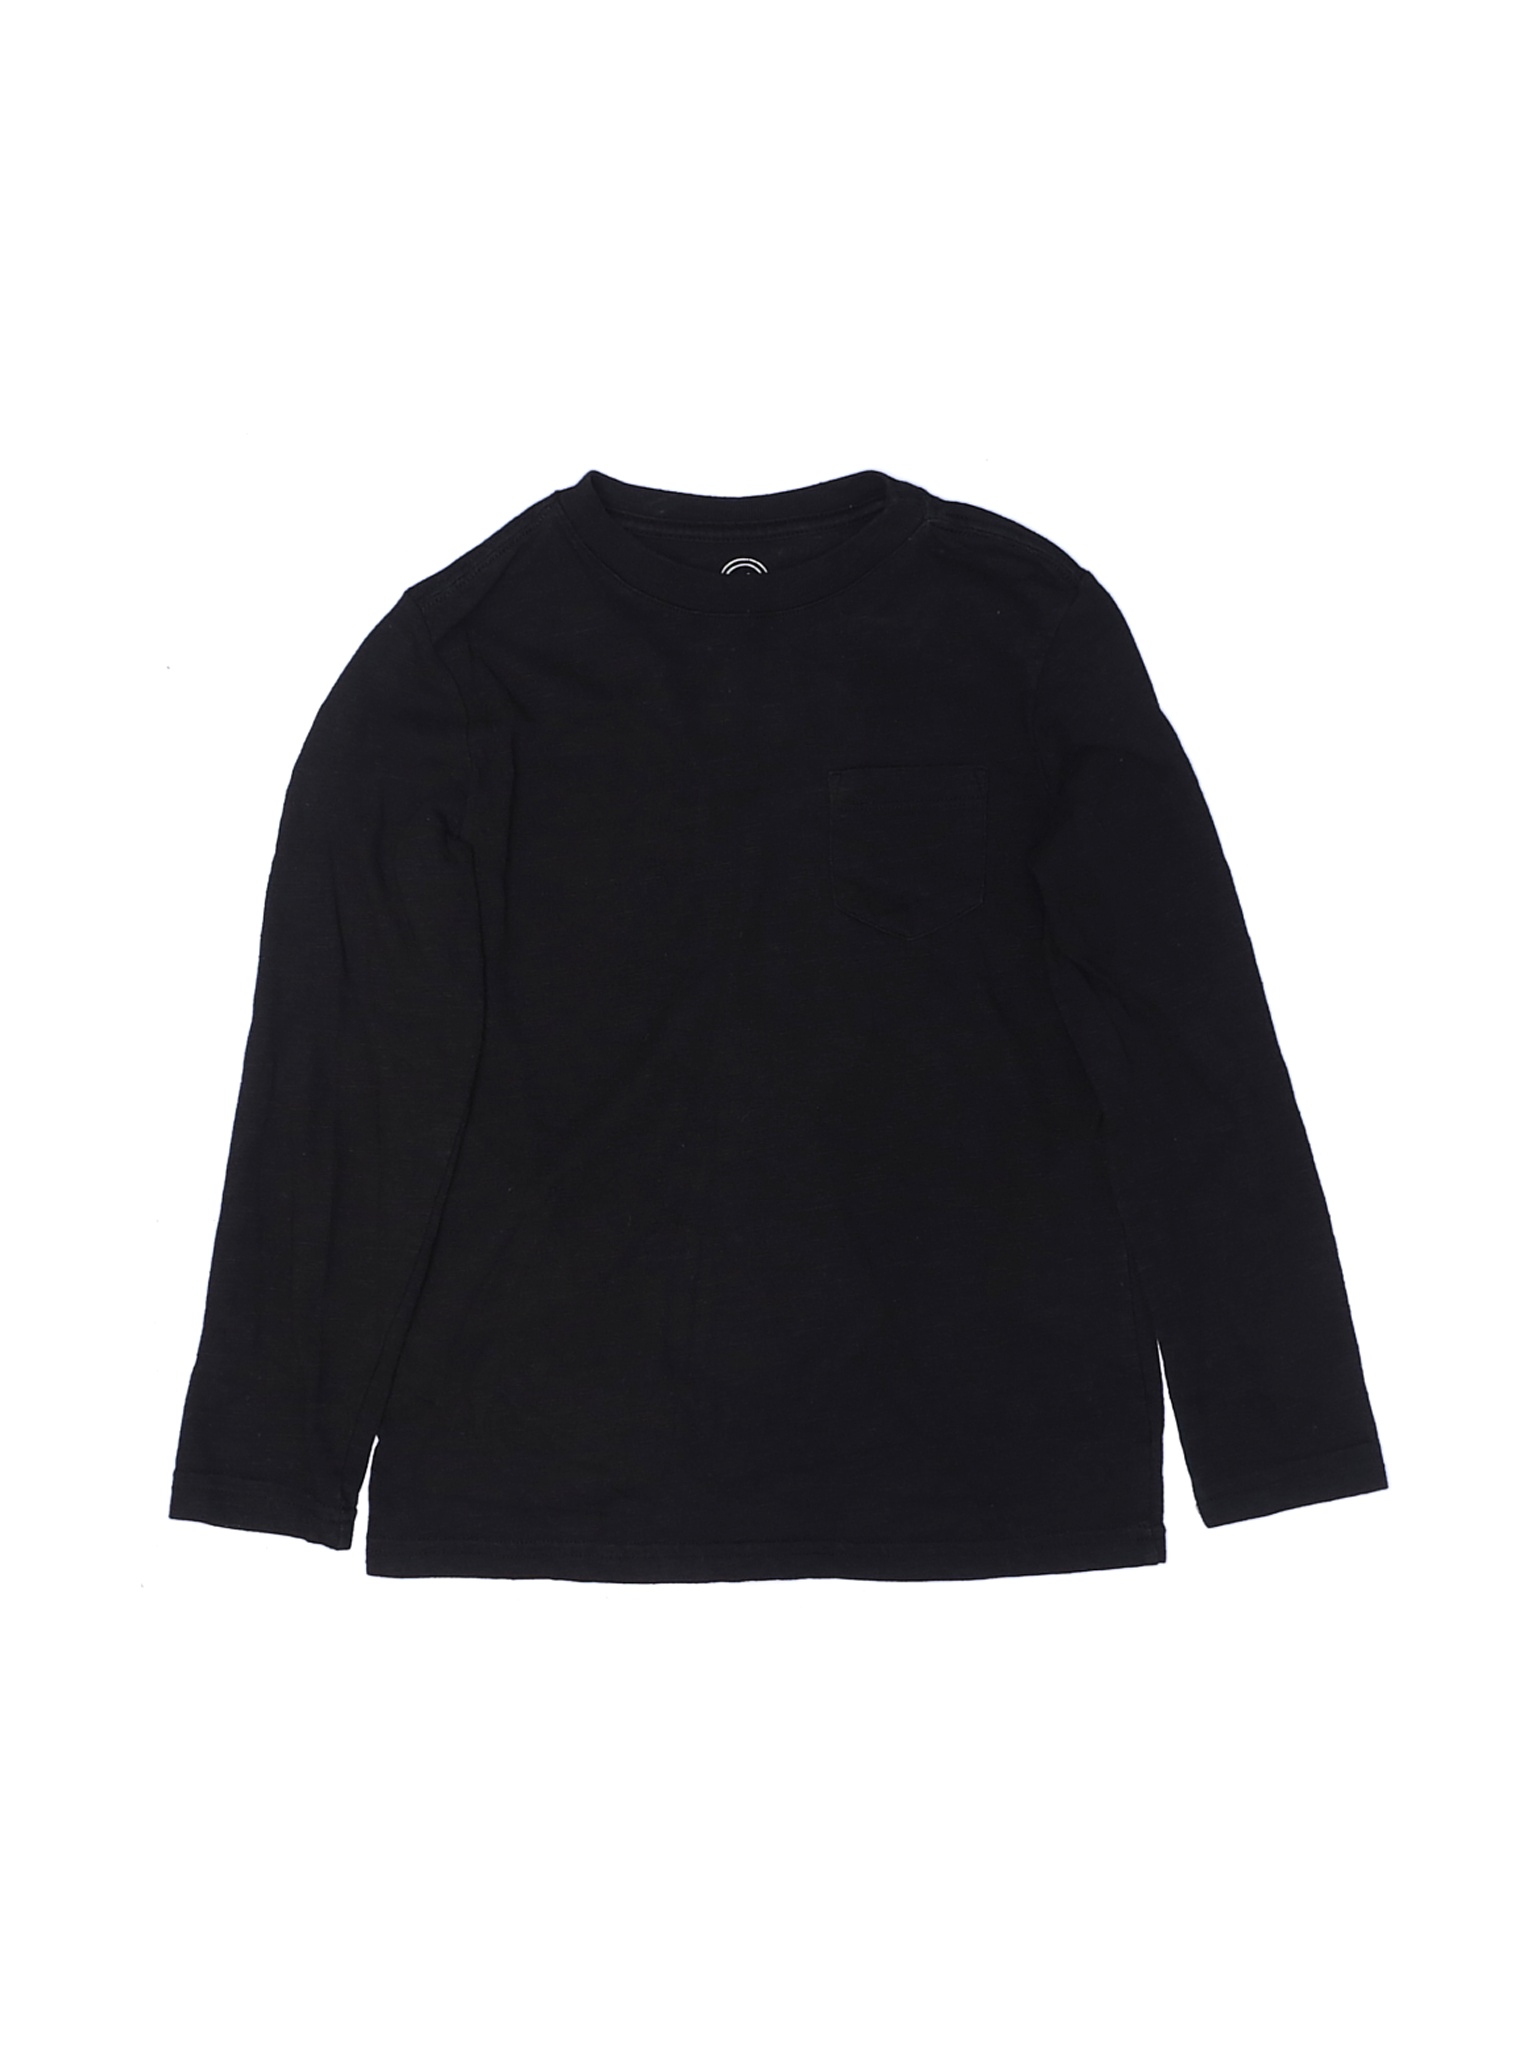 Wonder Nation Solid Black Long Sleeve T-Shirt Size S (Youth) - 60% off ...